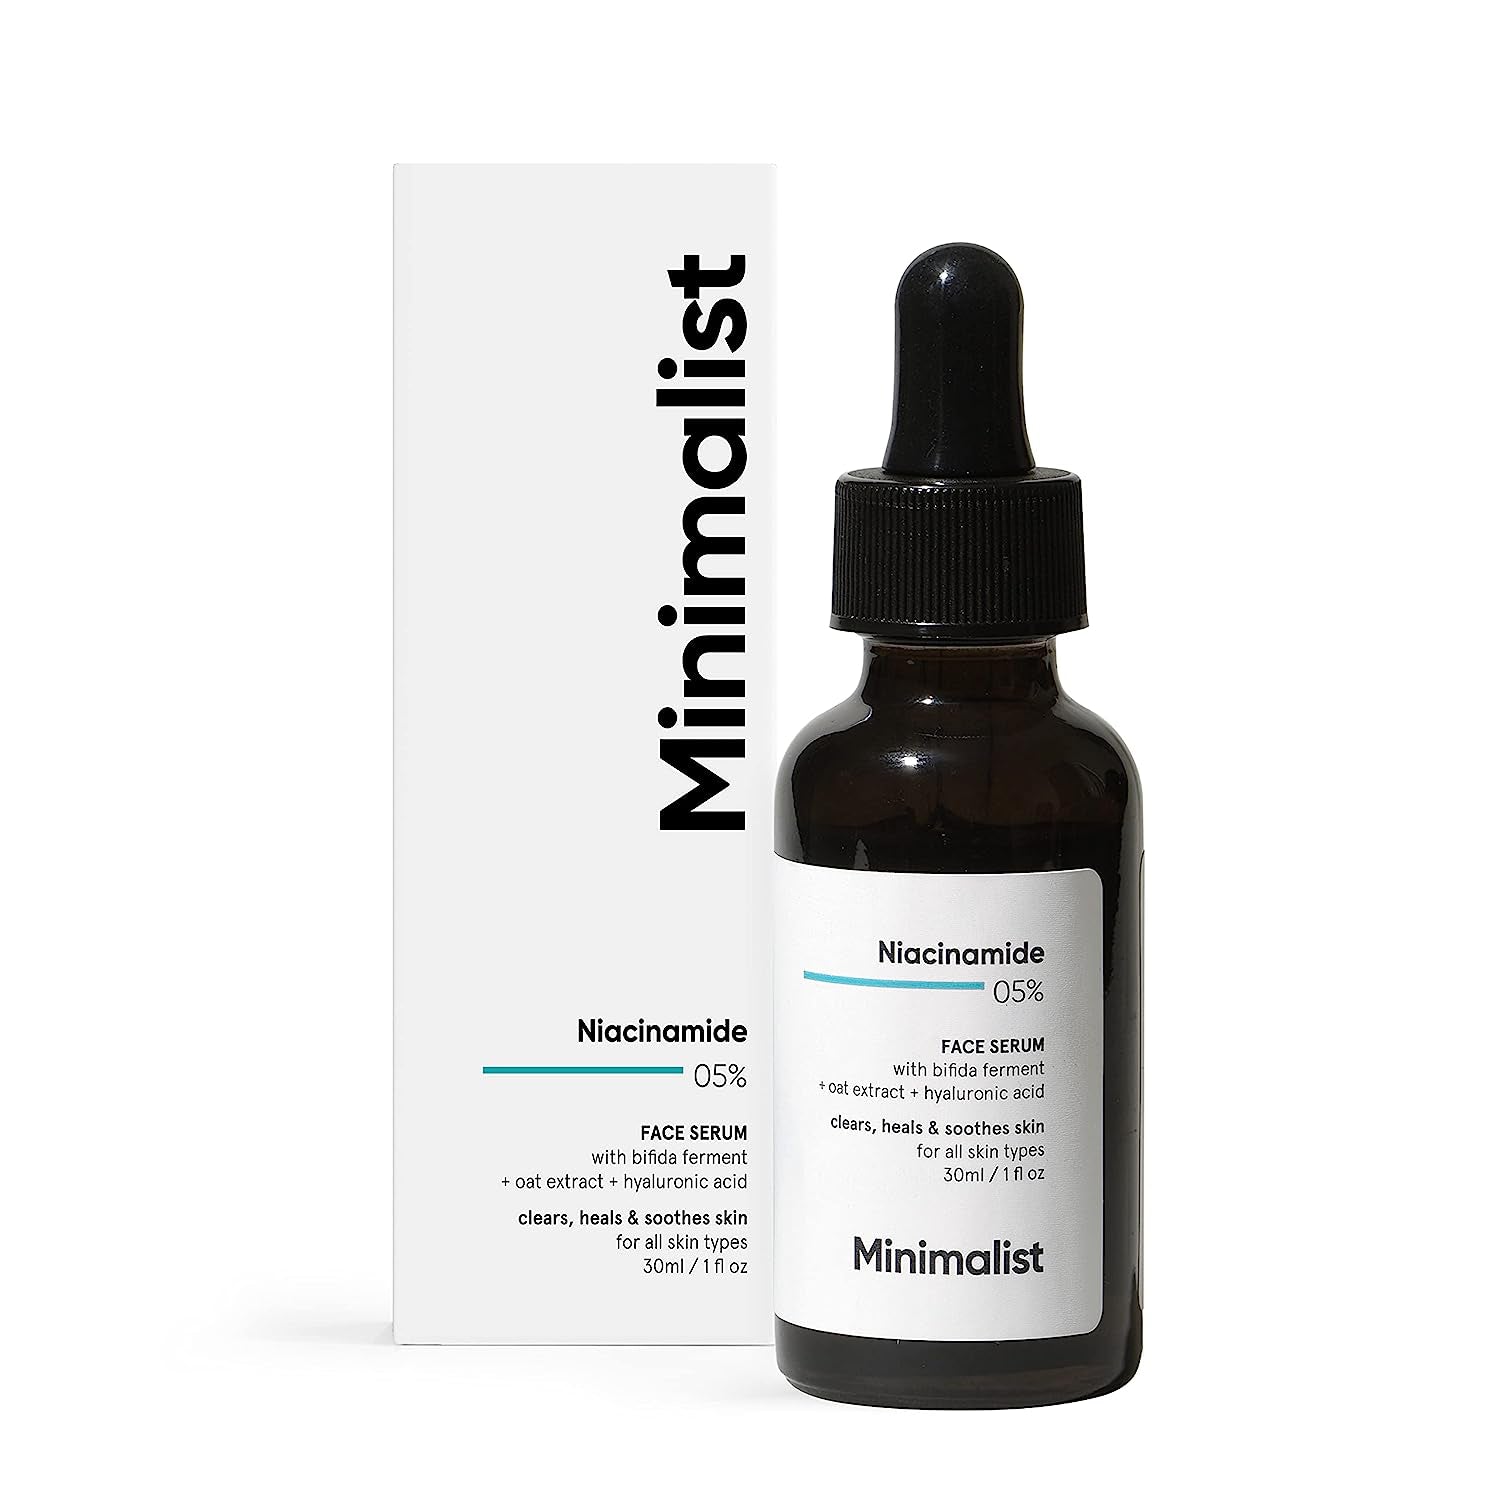 Professional Face Serum with Niacinamide, Hyaluronic Acid, and Pore Minimizer - 1 Fl Oz / 30 Ml